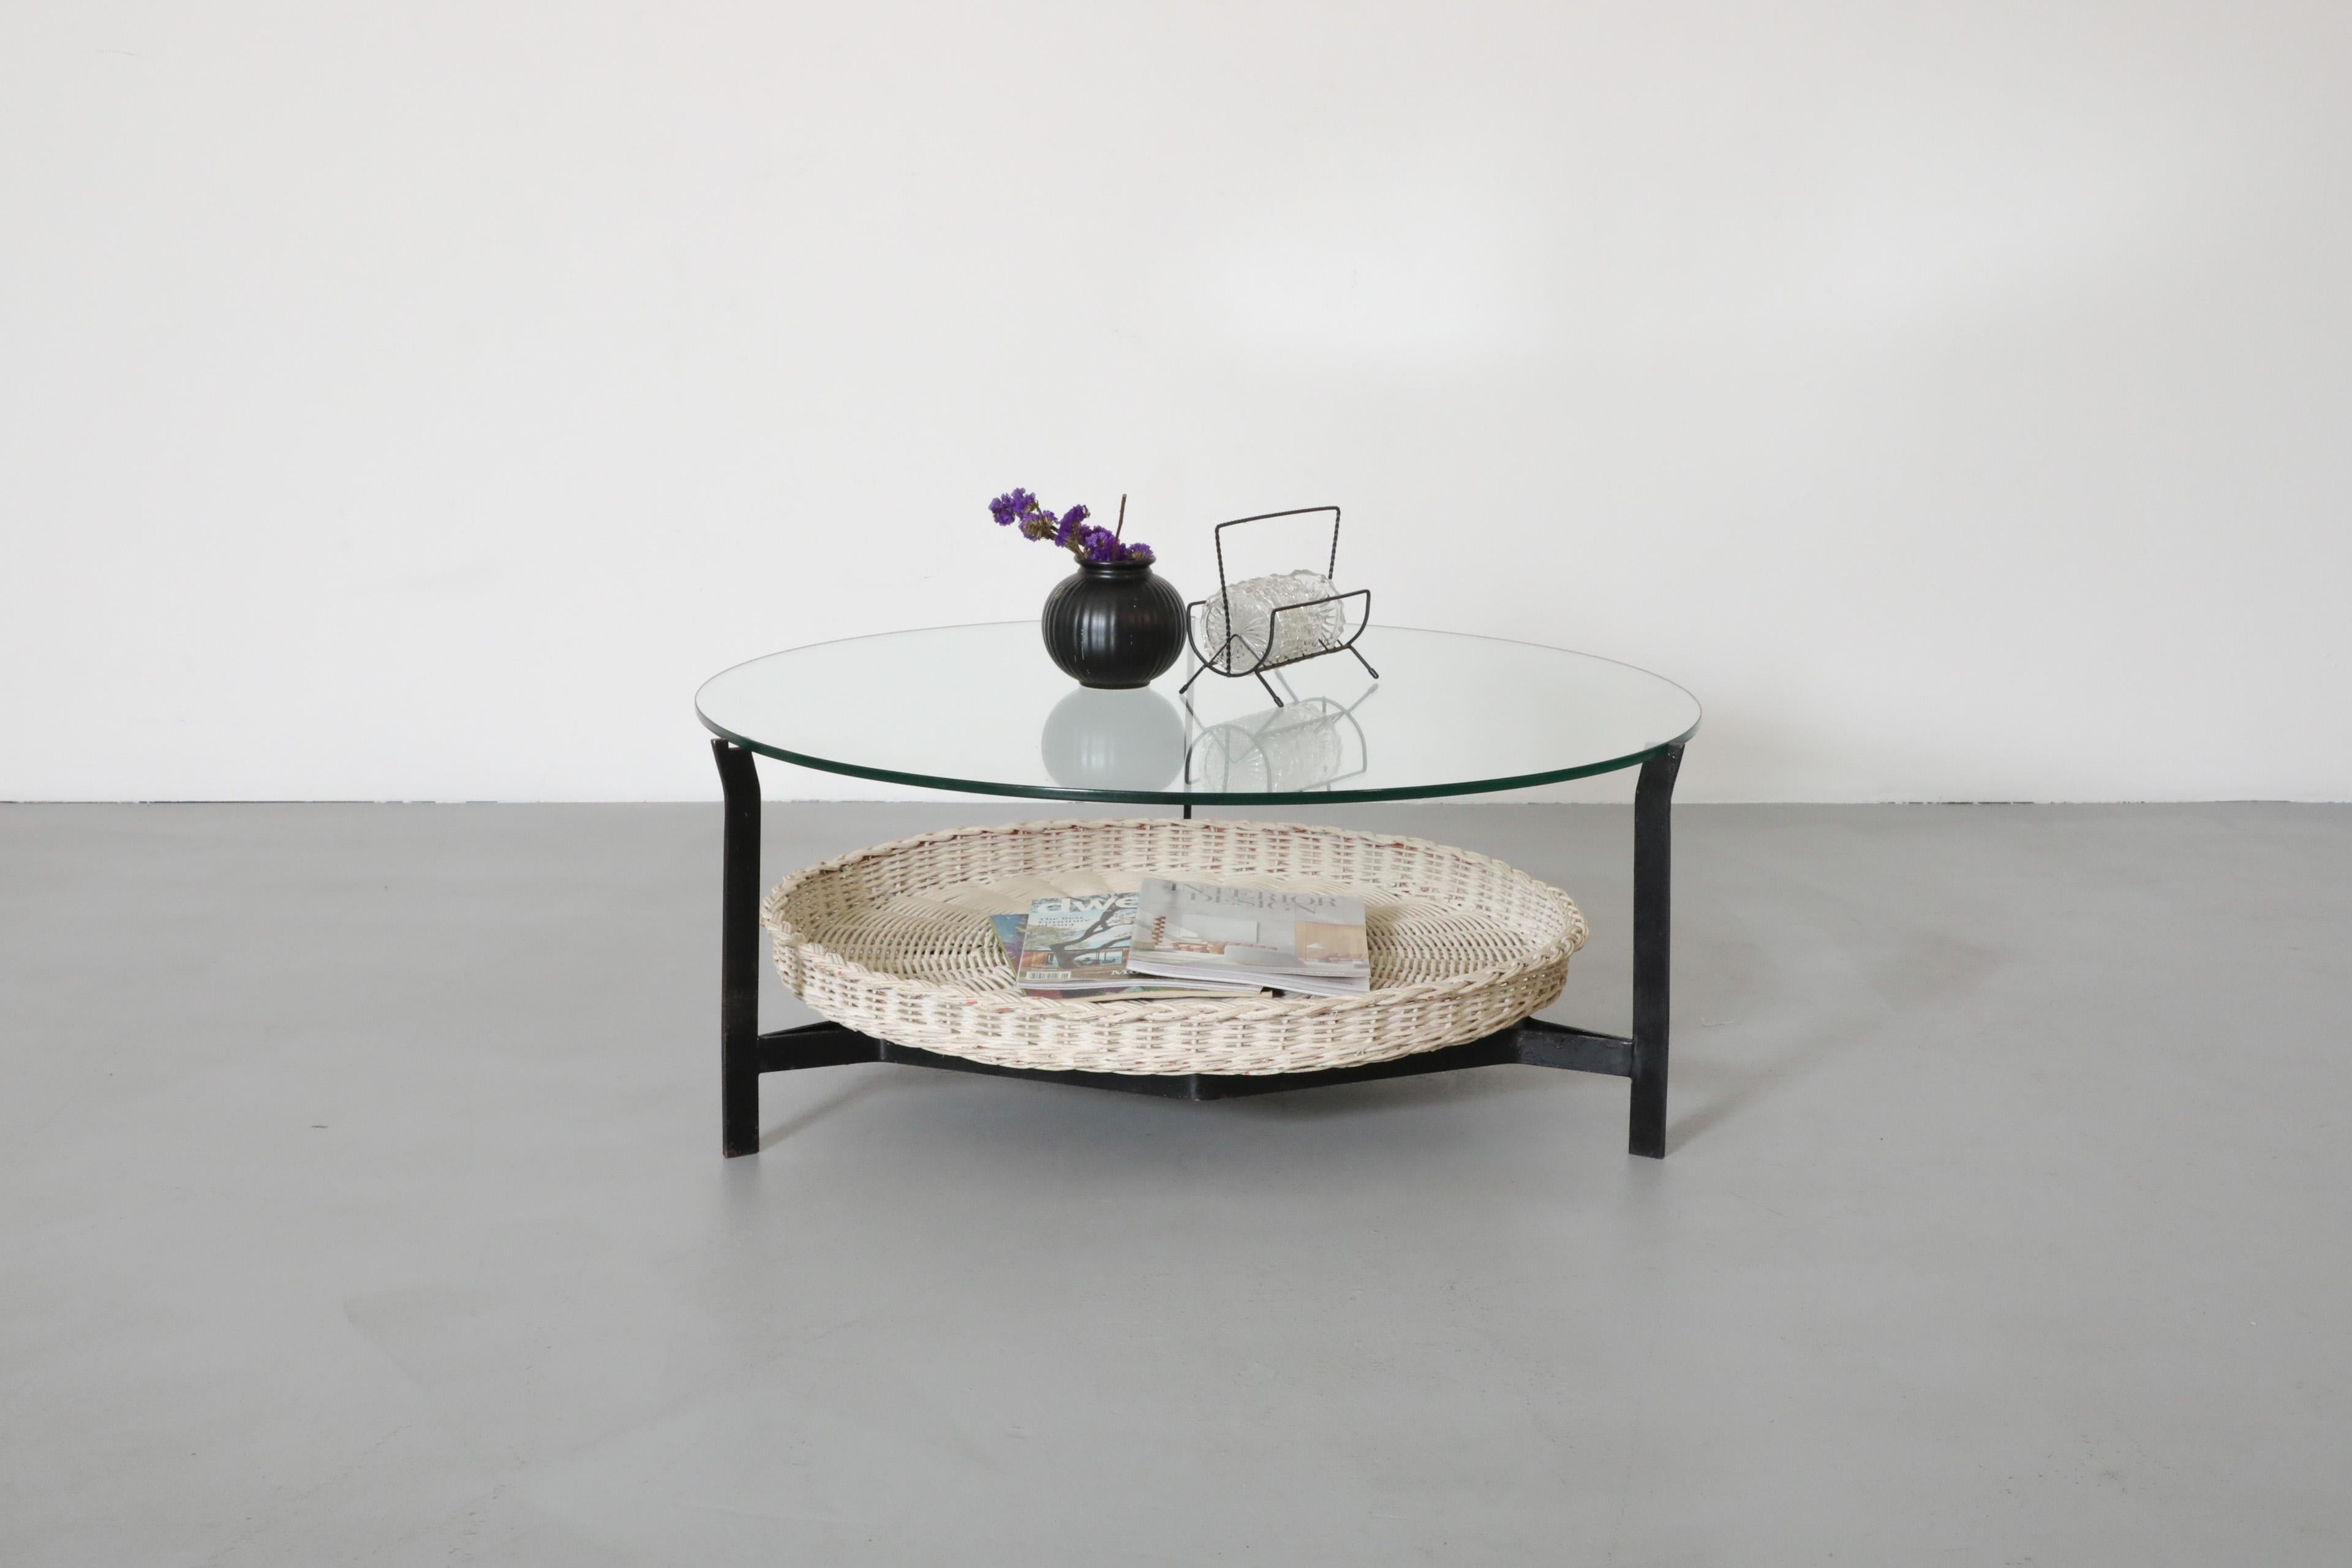 Dutch Mid-Century, Modernist coffee table with handsome, black enameled metal frame, hand-woven white rattan basket and a glass top. Design is attributed to prolific post-war designer Dirk van Sliedregt for the Gebr. Jonkers company. The table